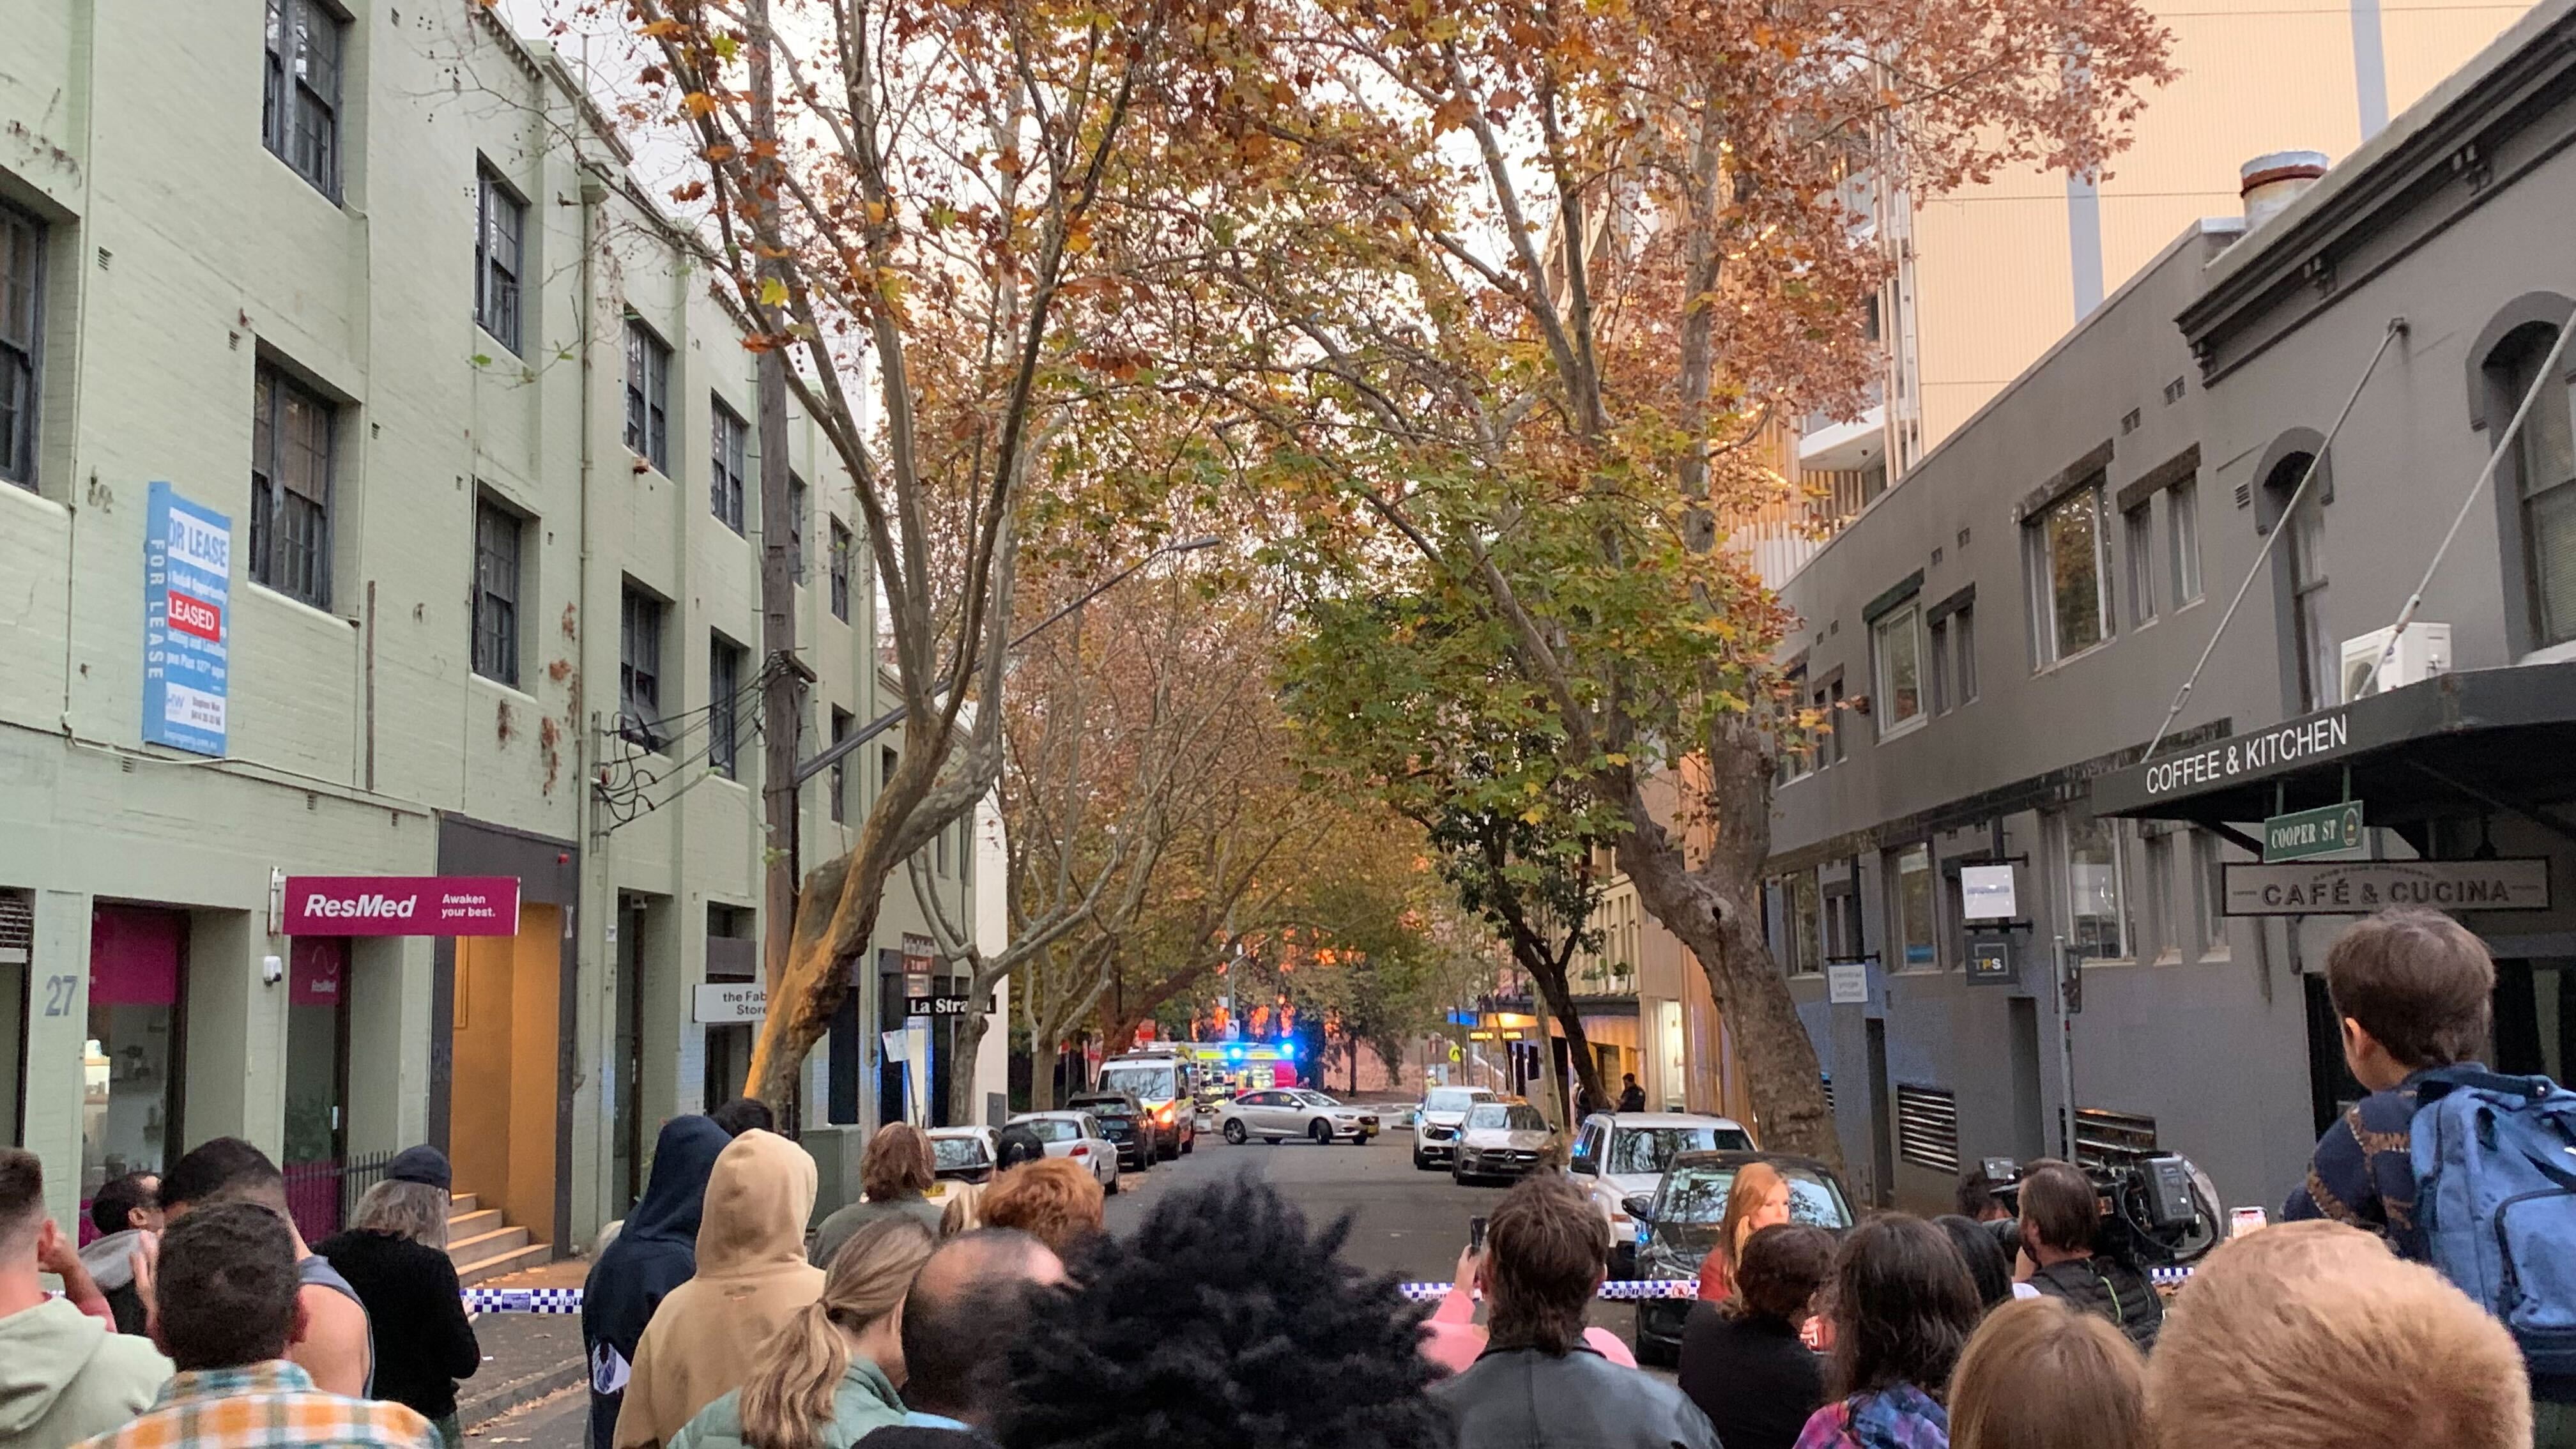 Residents moving through the CBD have described the moment the fire broke out and the wave of heat felt in the area.﻿